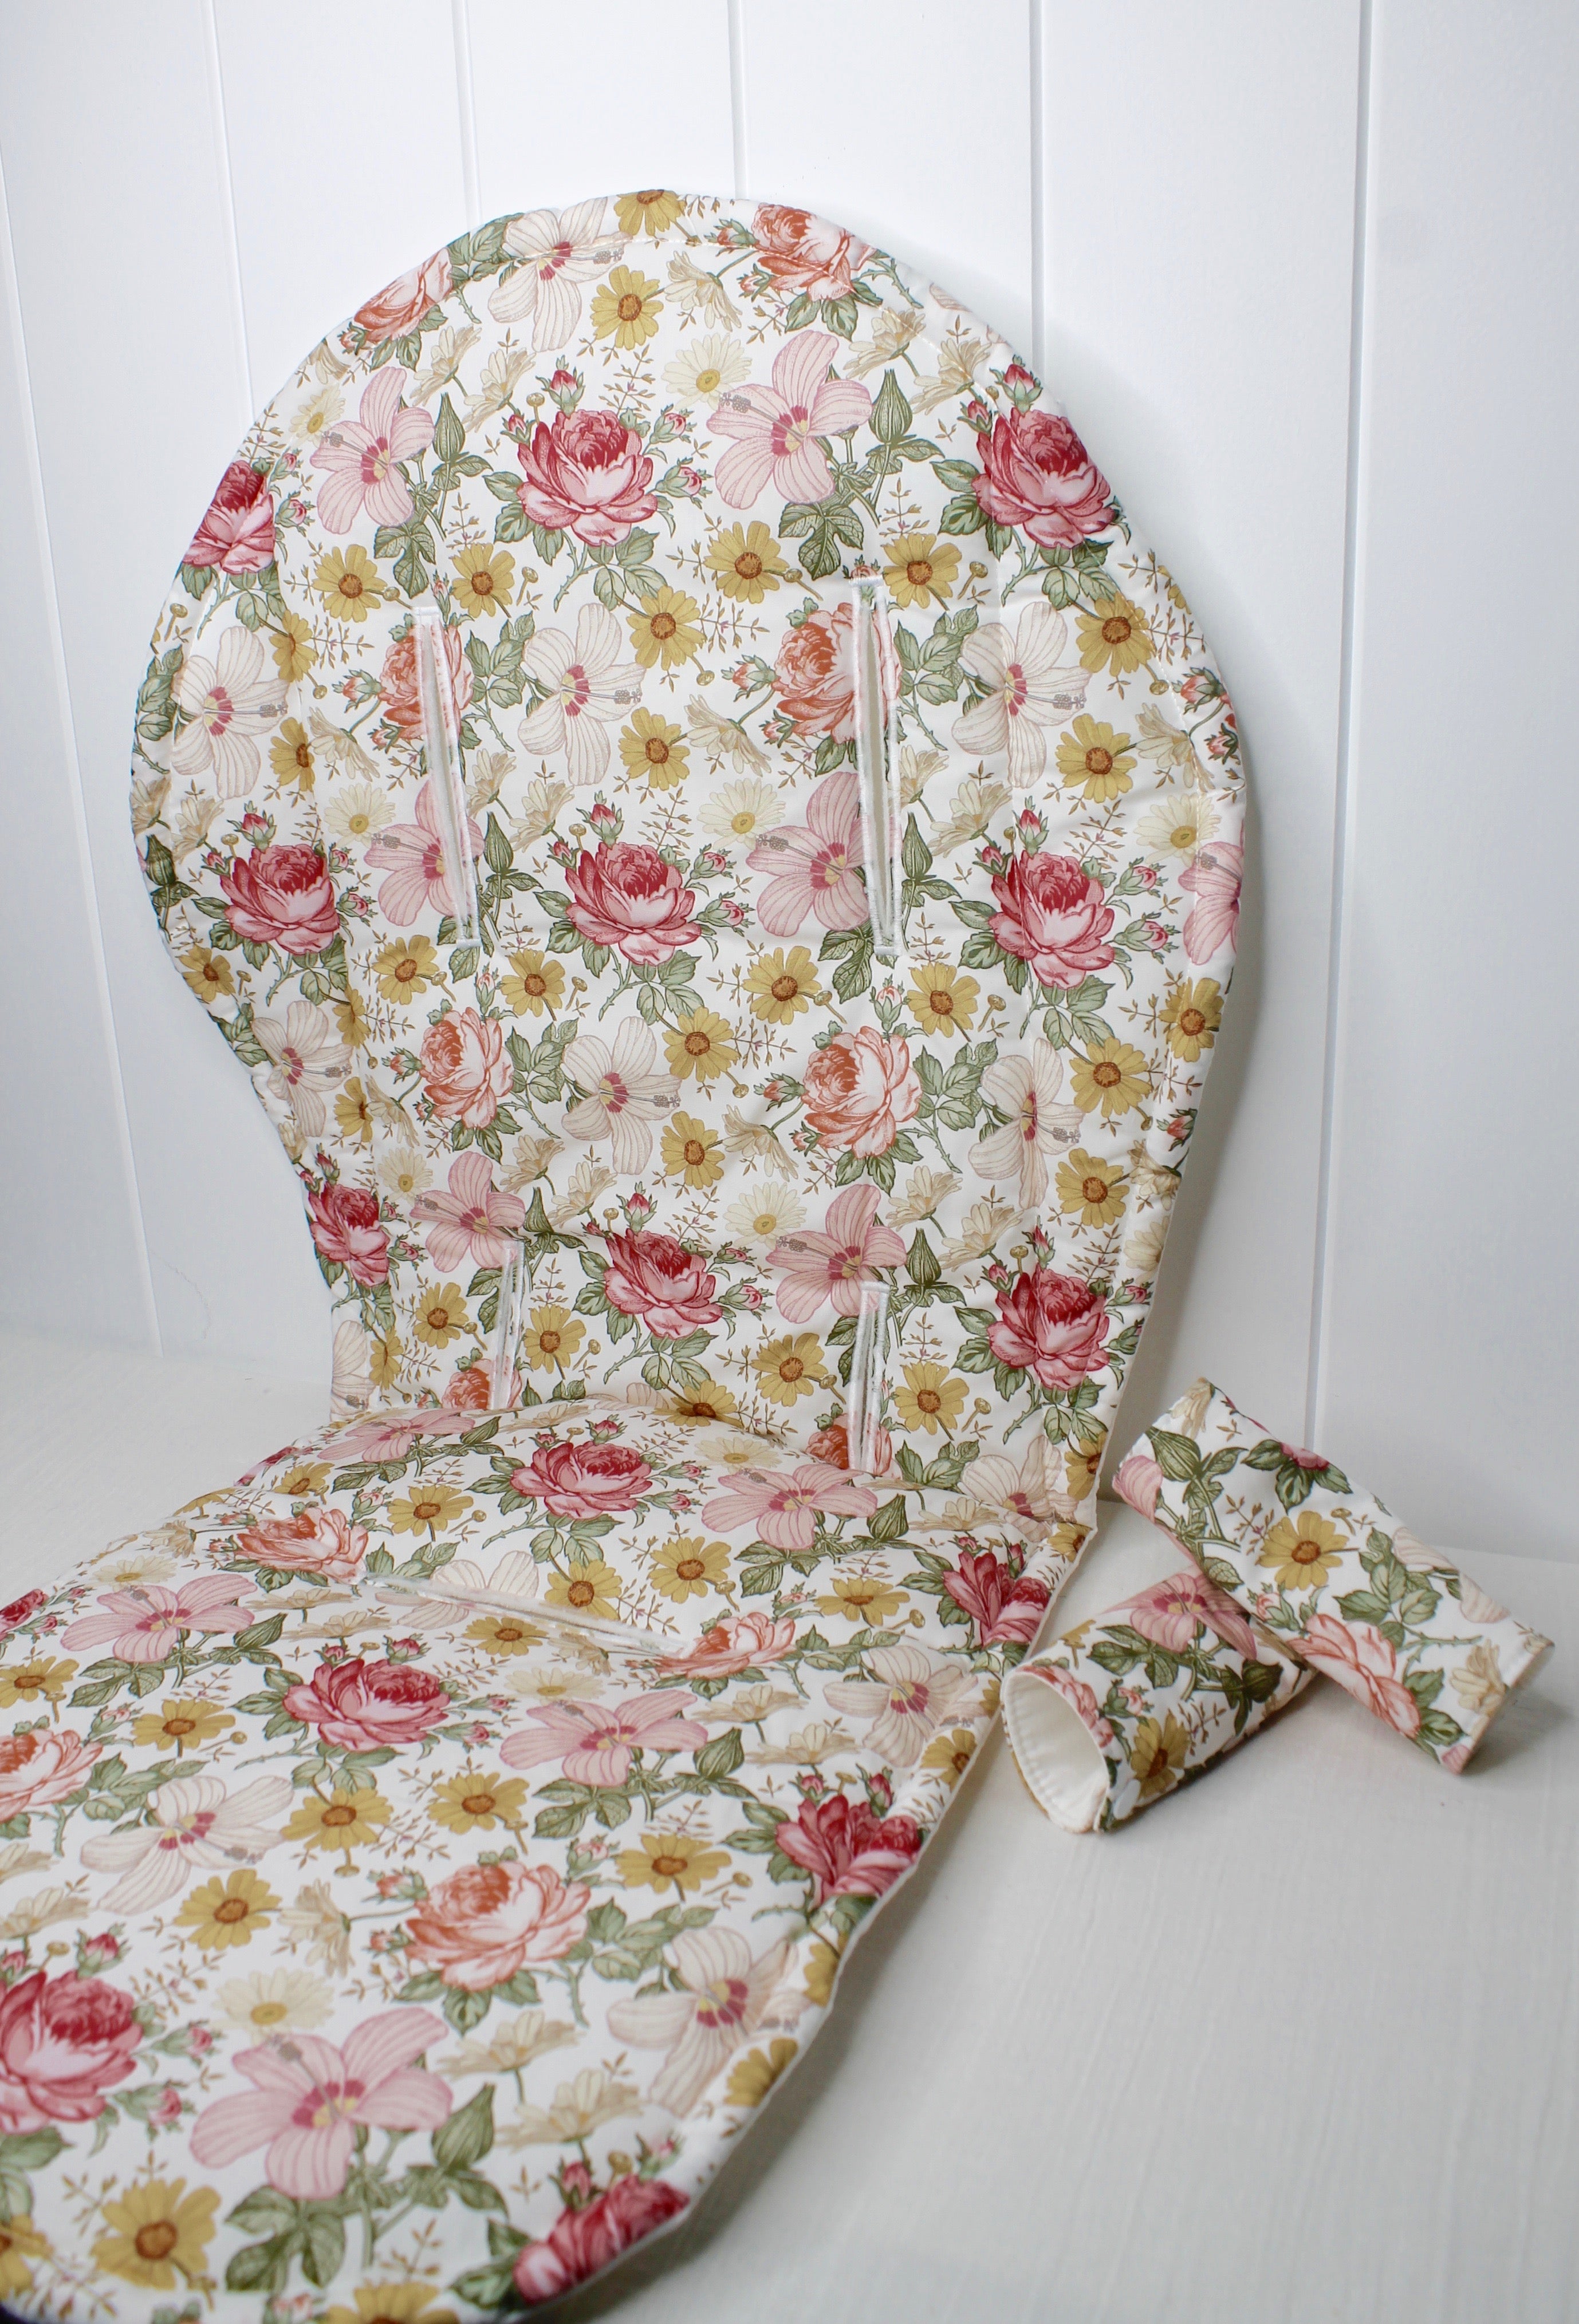 Summer Floral B Reversible Pram Liner with Strap Covers